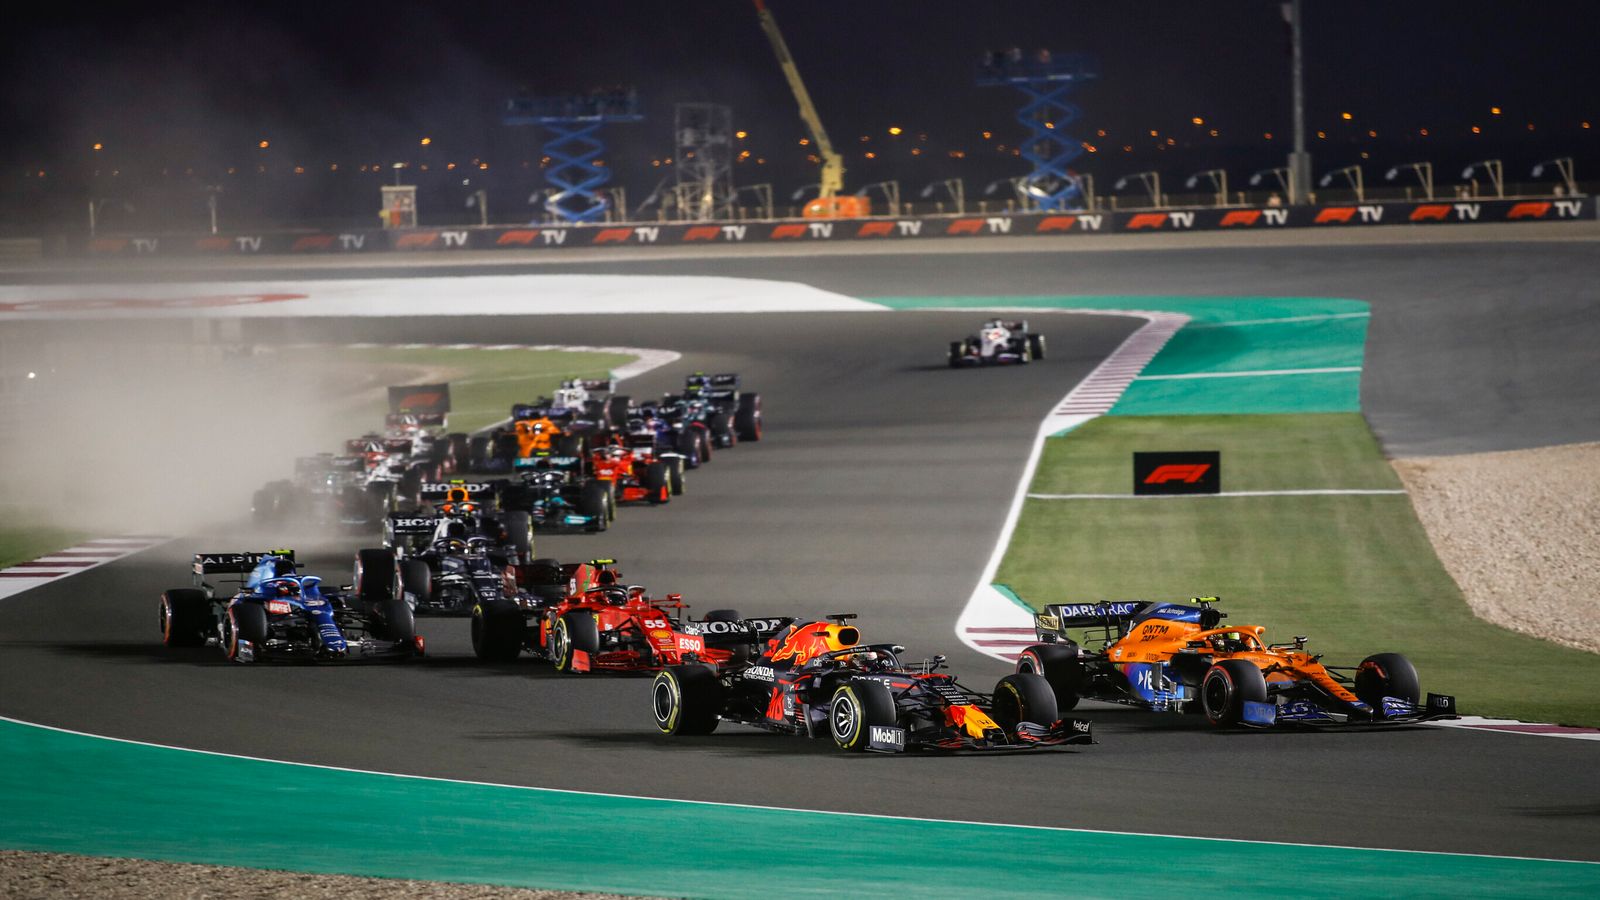 What to expect from the returning Qatar GP?